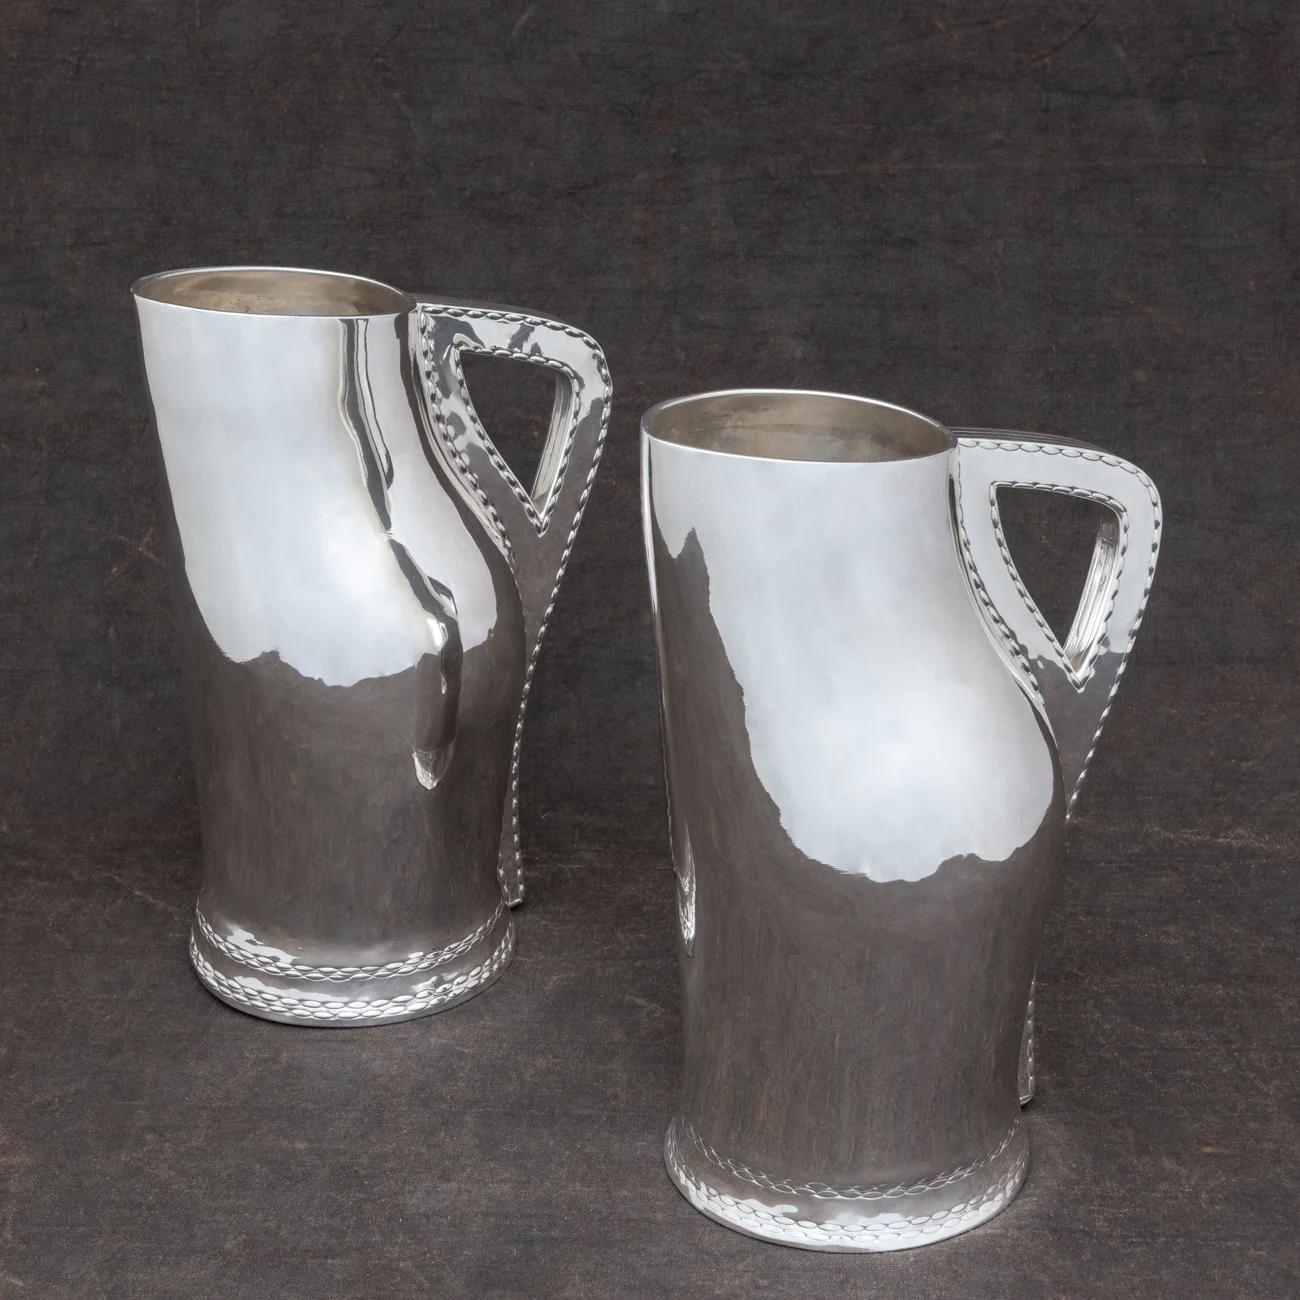 Spectacular pair of sterling silver jugs by Elkington & Co. Hallmarked London, 1884. Mimicking the design of English blackjack leather jugs typically seen in the 16th and 17th century.

Dimensions of each: 28cm/ 11 inches (height) x 13cm/ 5?